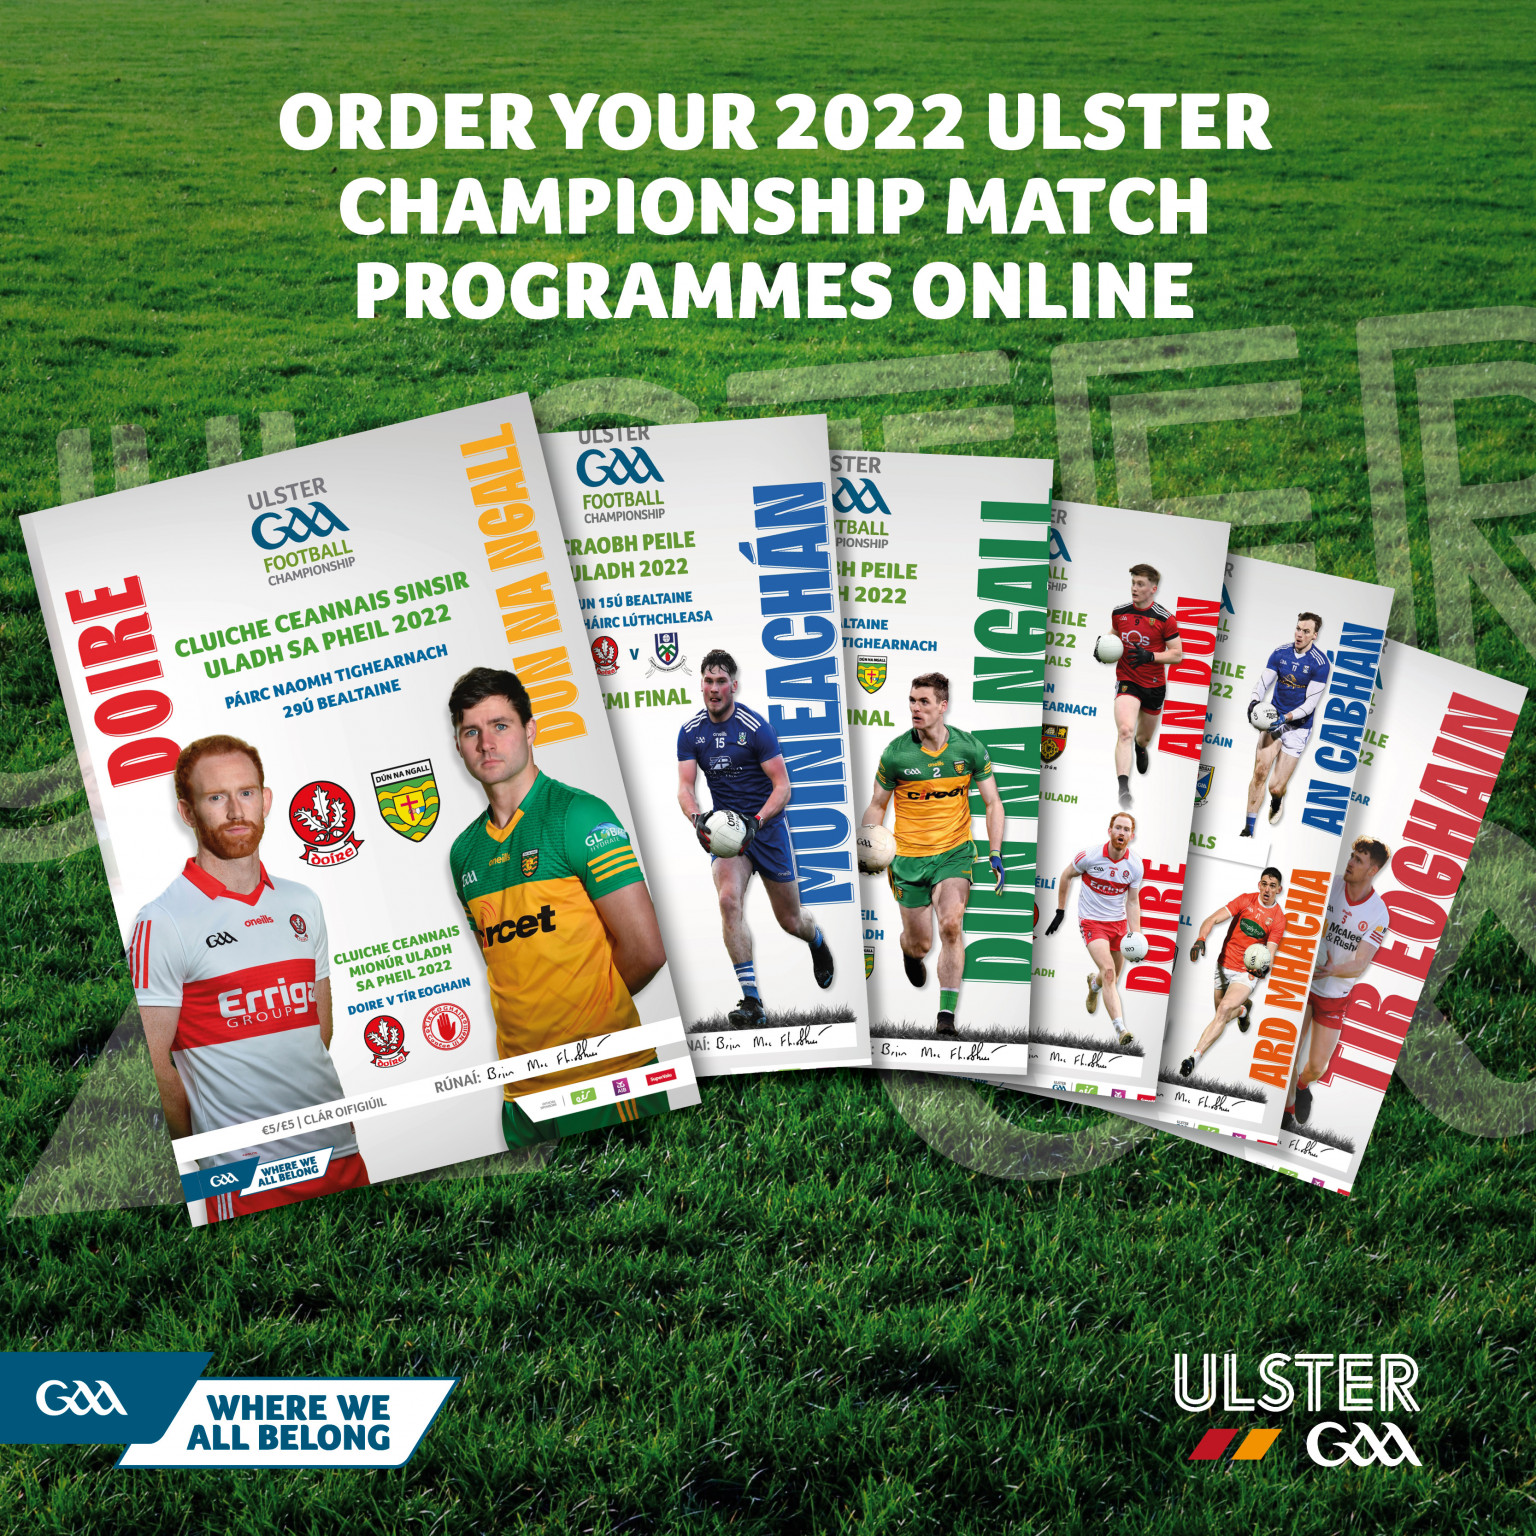 Ulster Championship Official Match Programmes now available to purchase